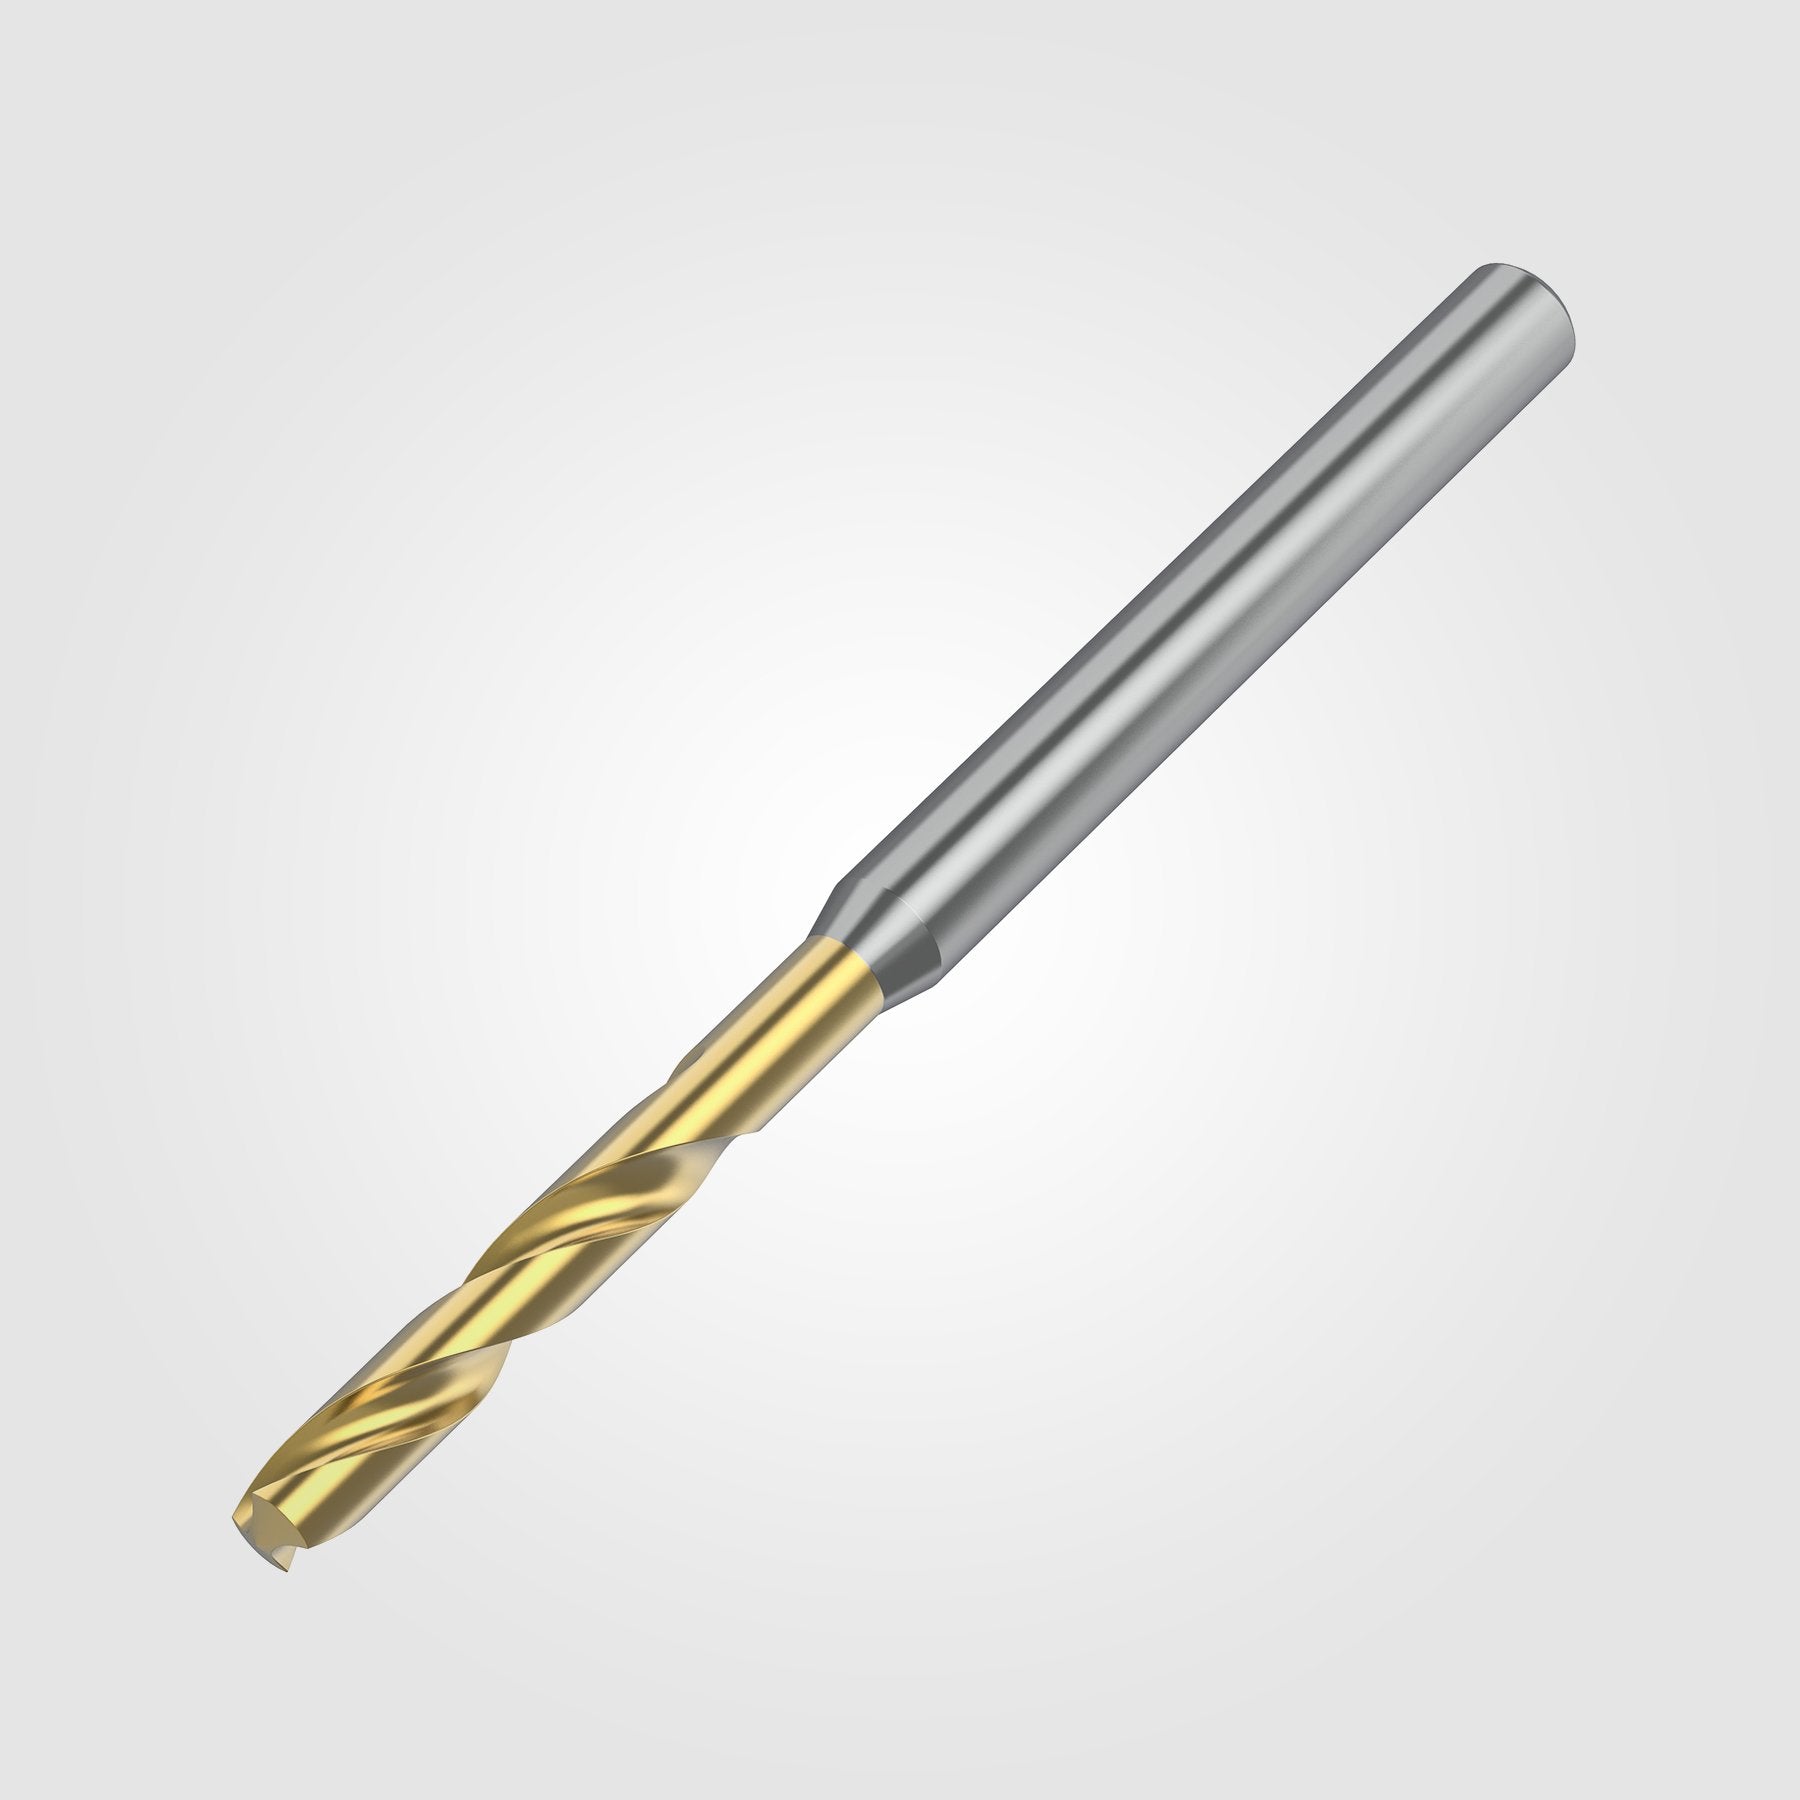 GOdrill (THROUGH COOLANT) | 16.8mm / .6614" / 3xD | SOLID CARBIDE DRILL | 4151286